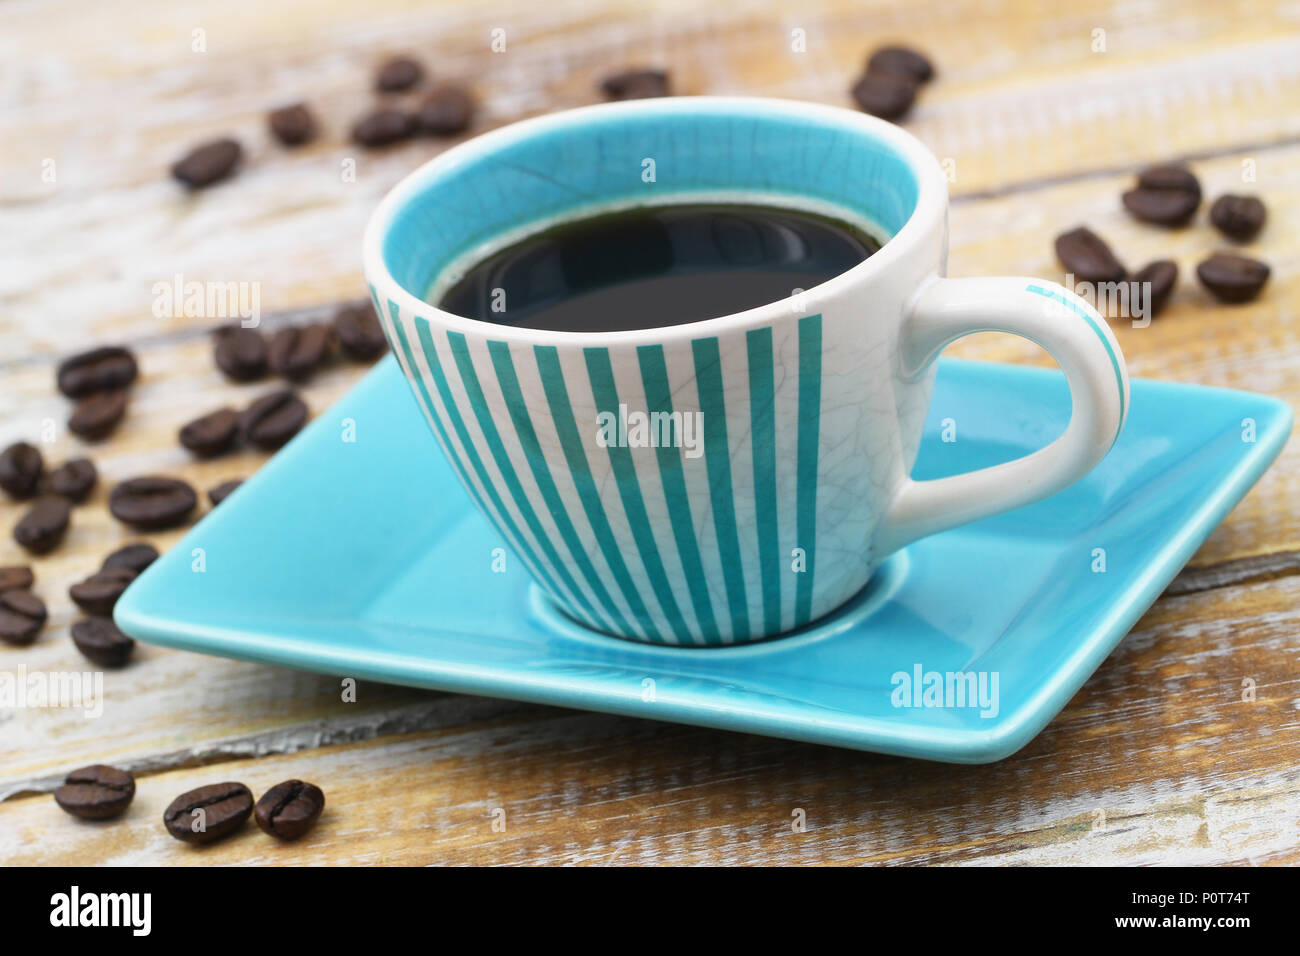 Espresso coffee in vintage blue and white striped cup on rustic wooden surface Stock Photo